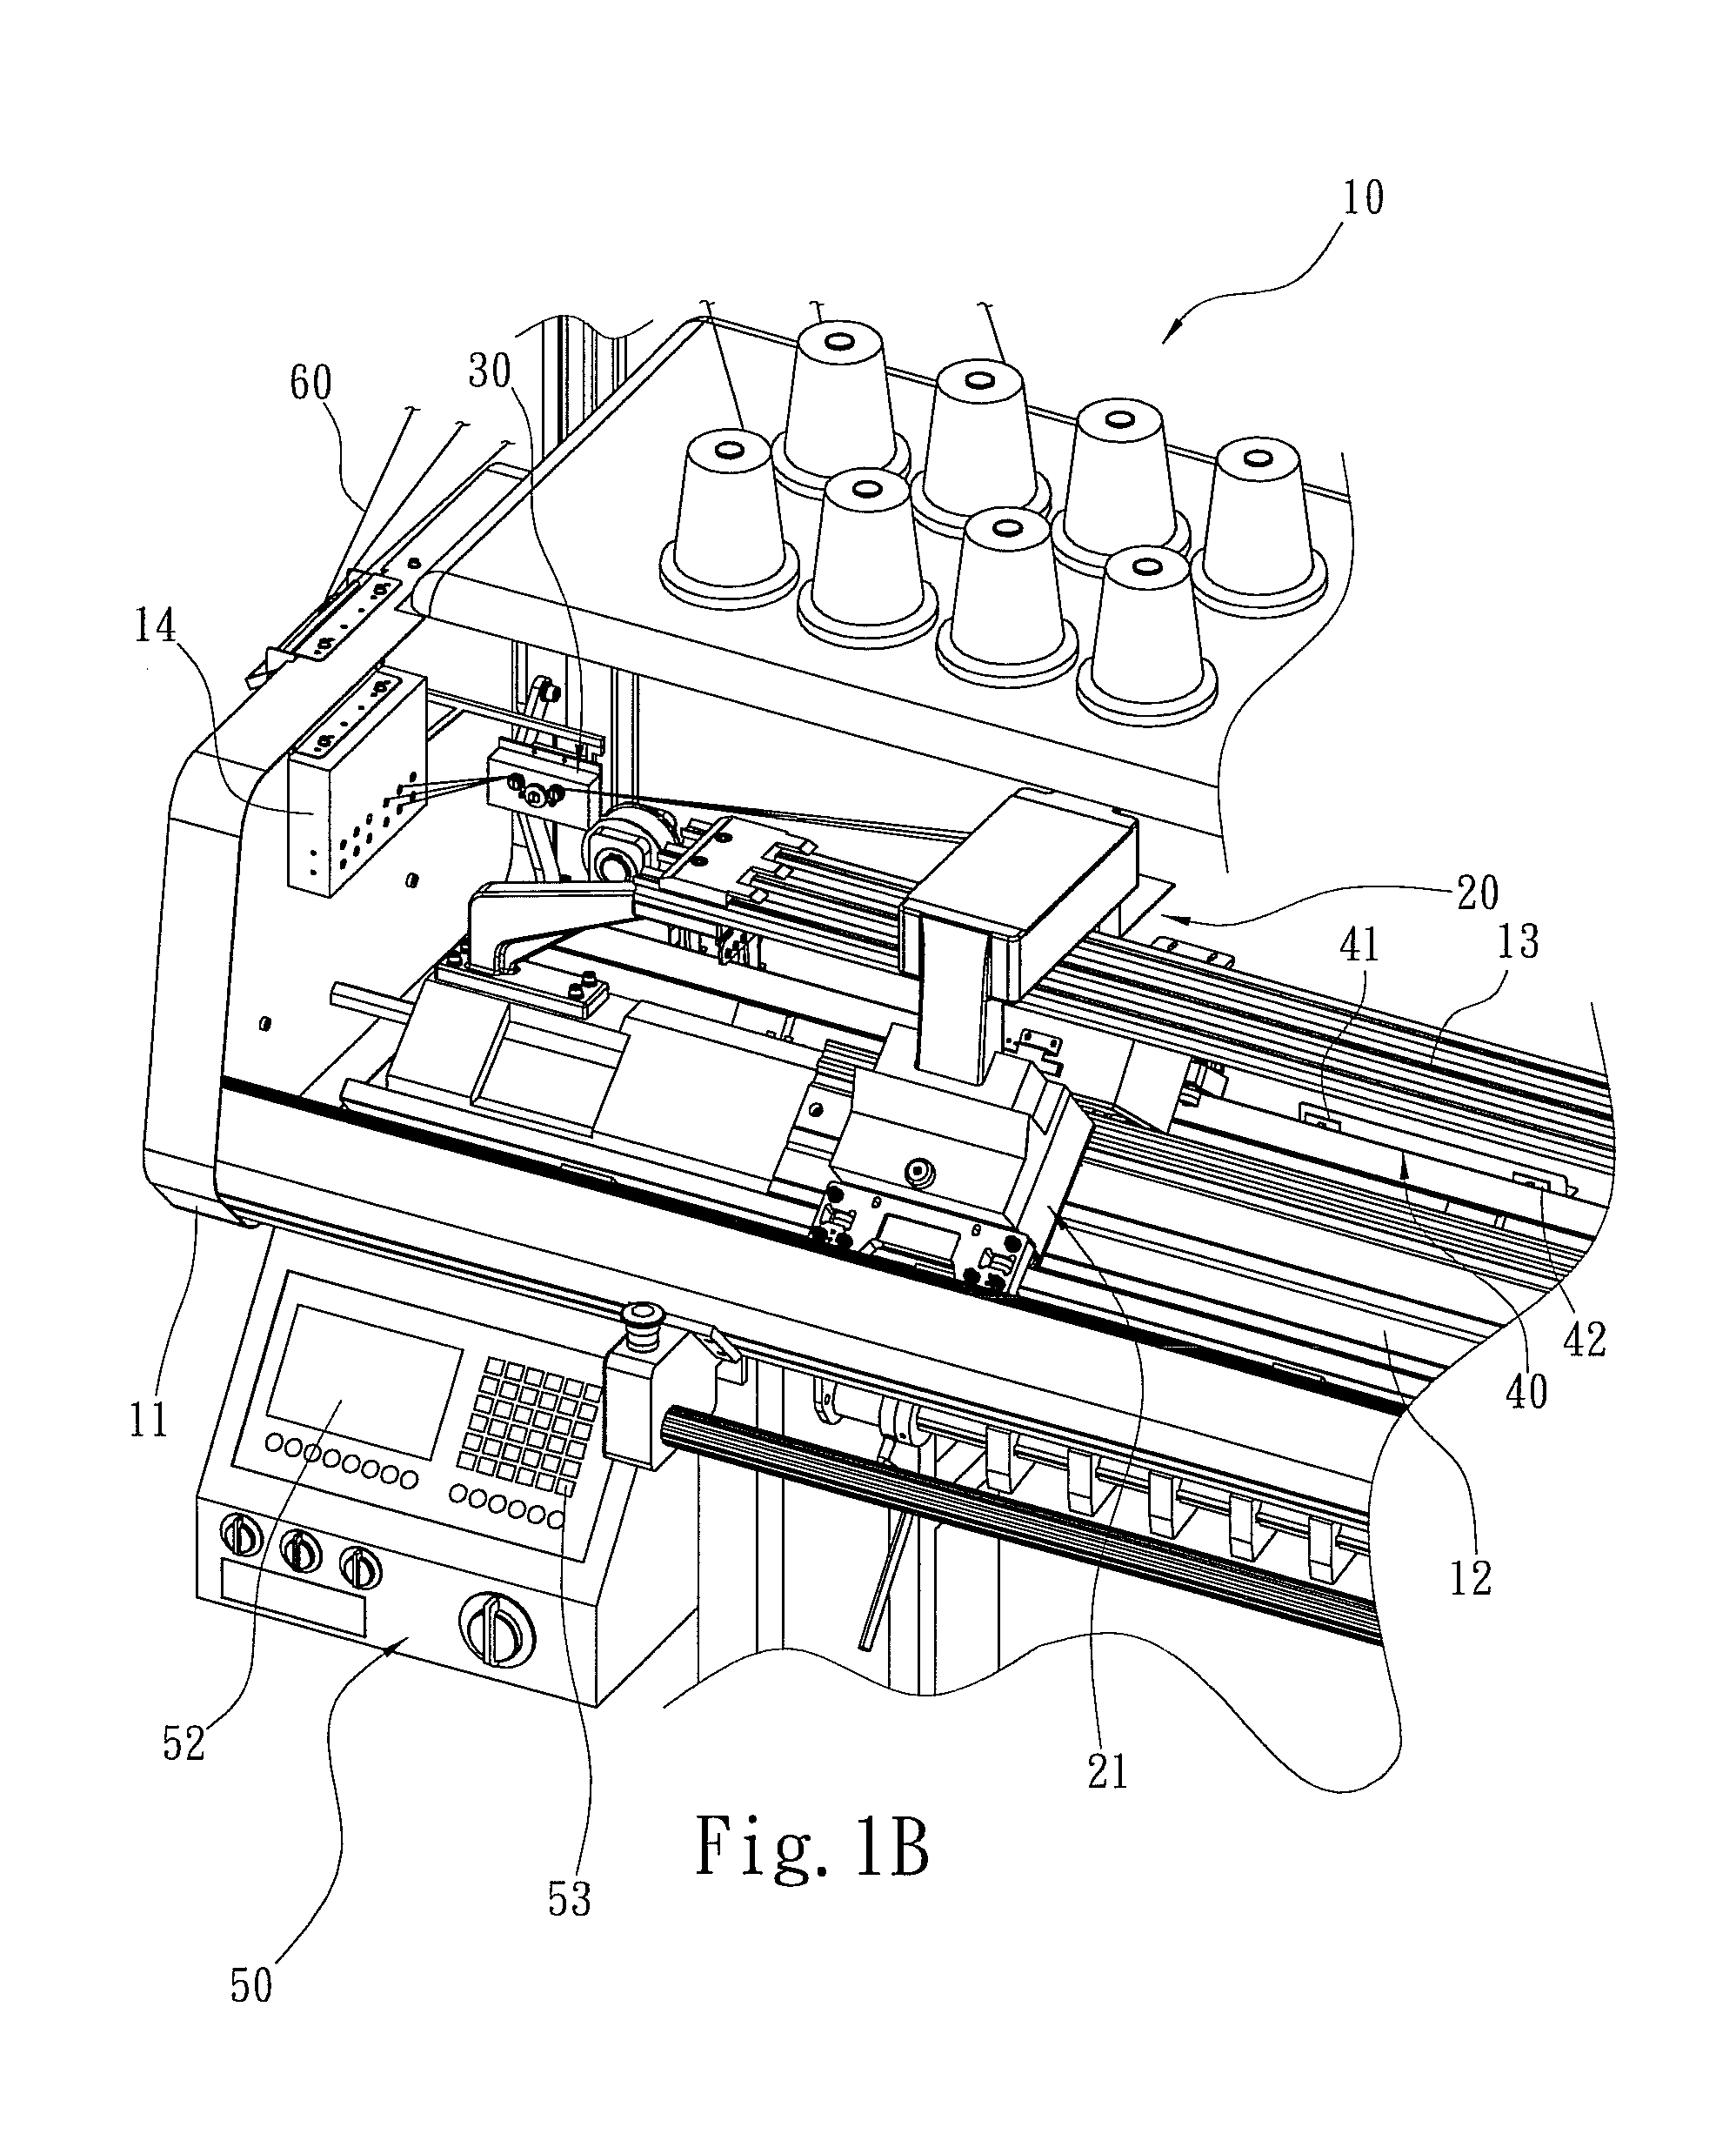 Yarn measuring device for flat bed knitting machines